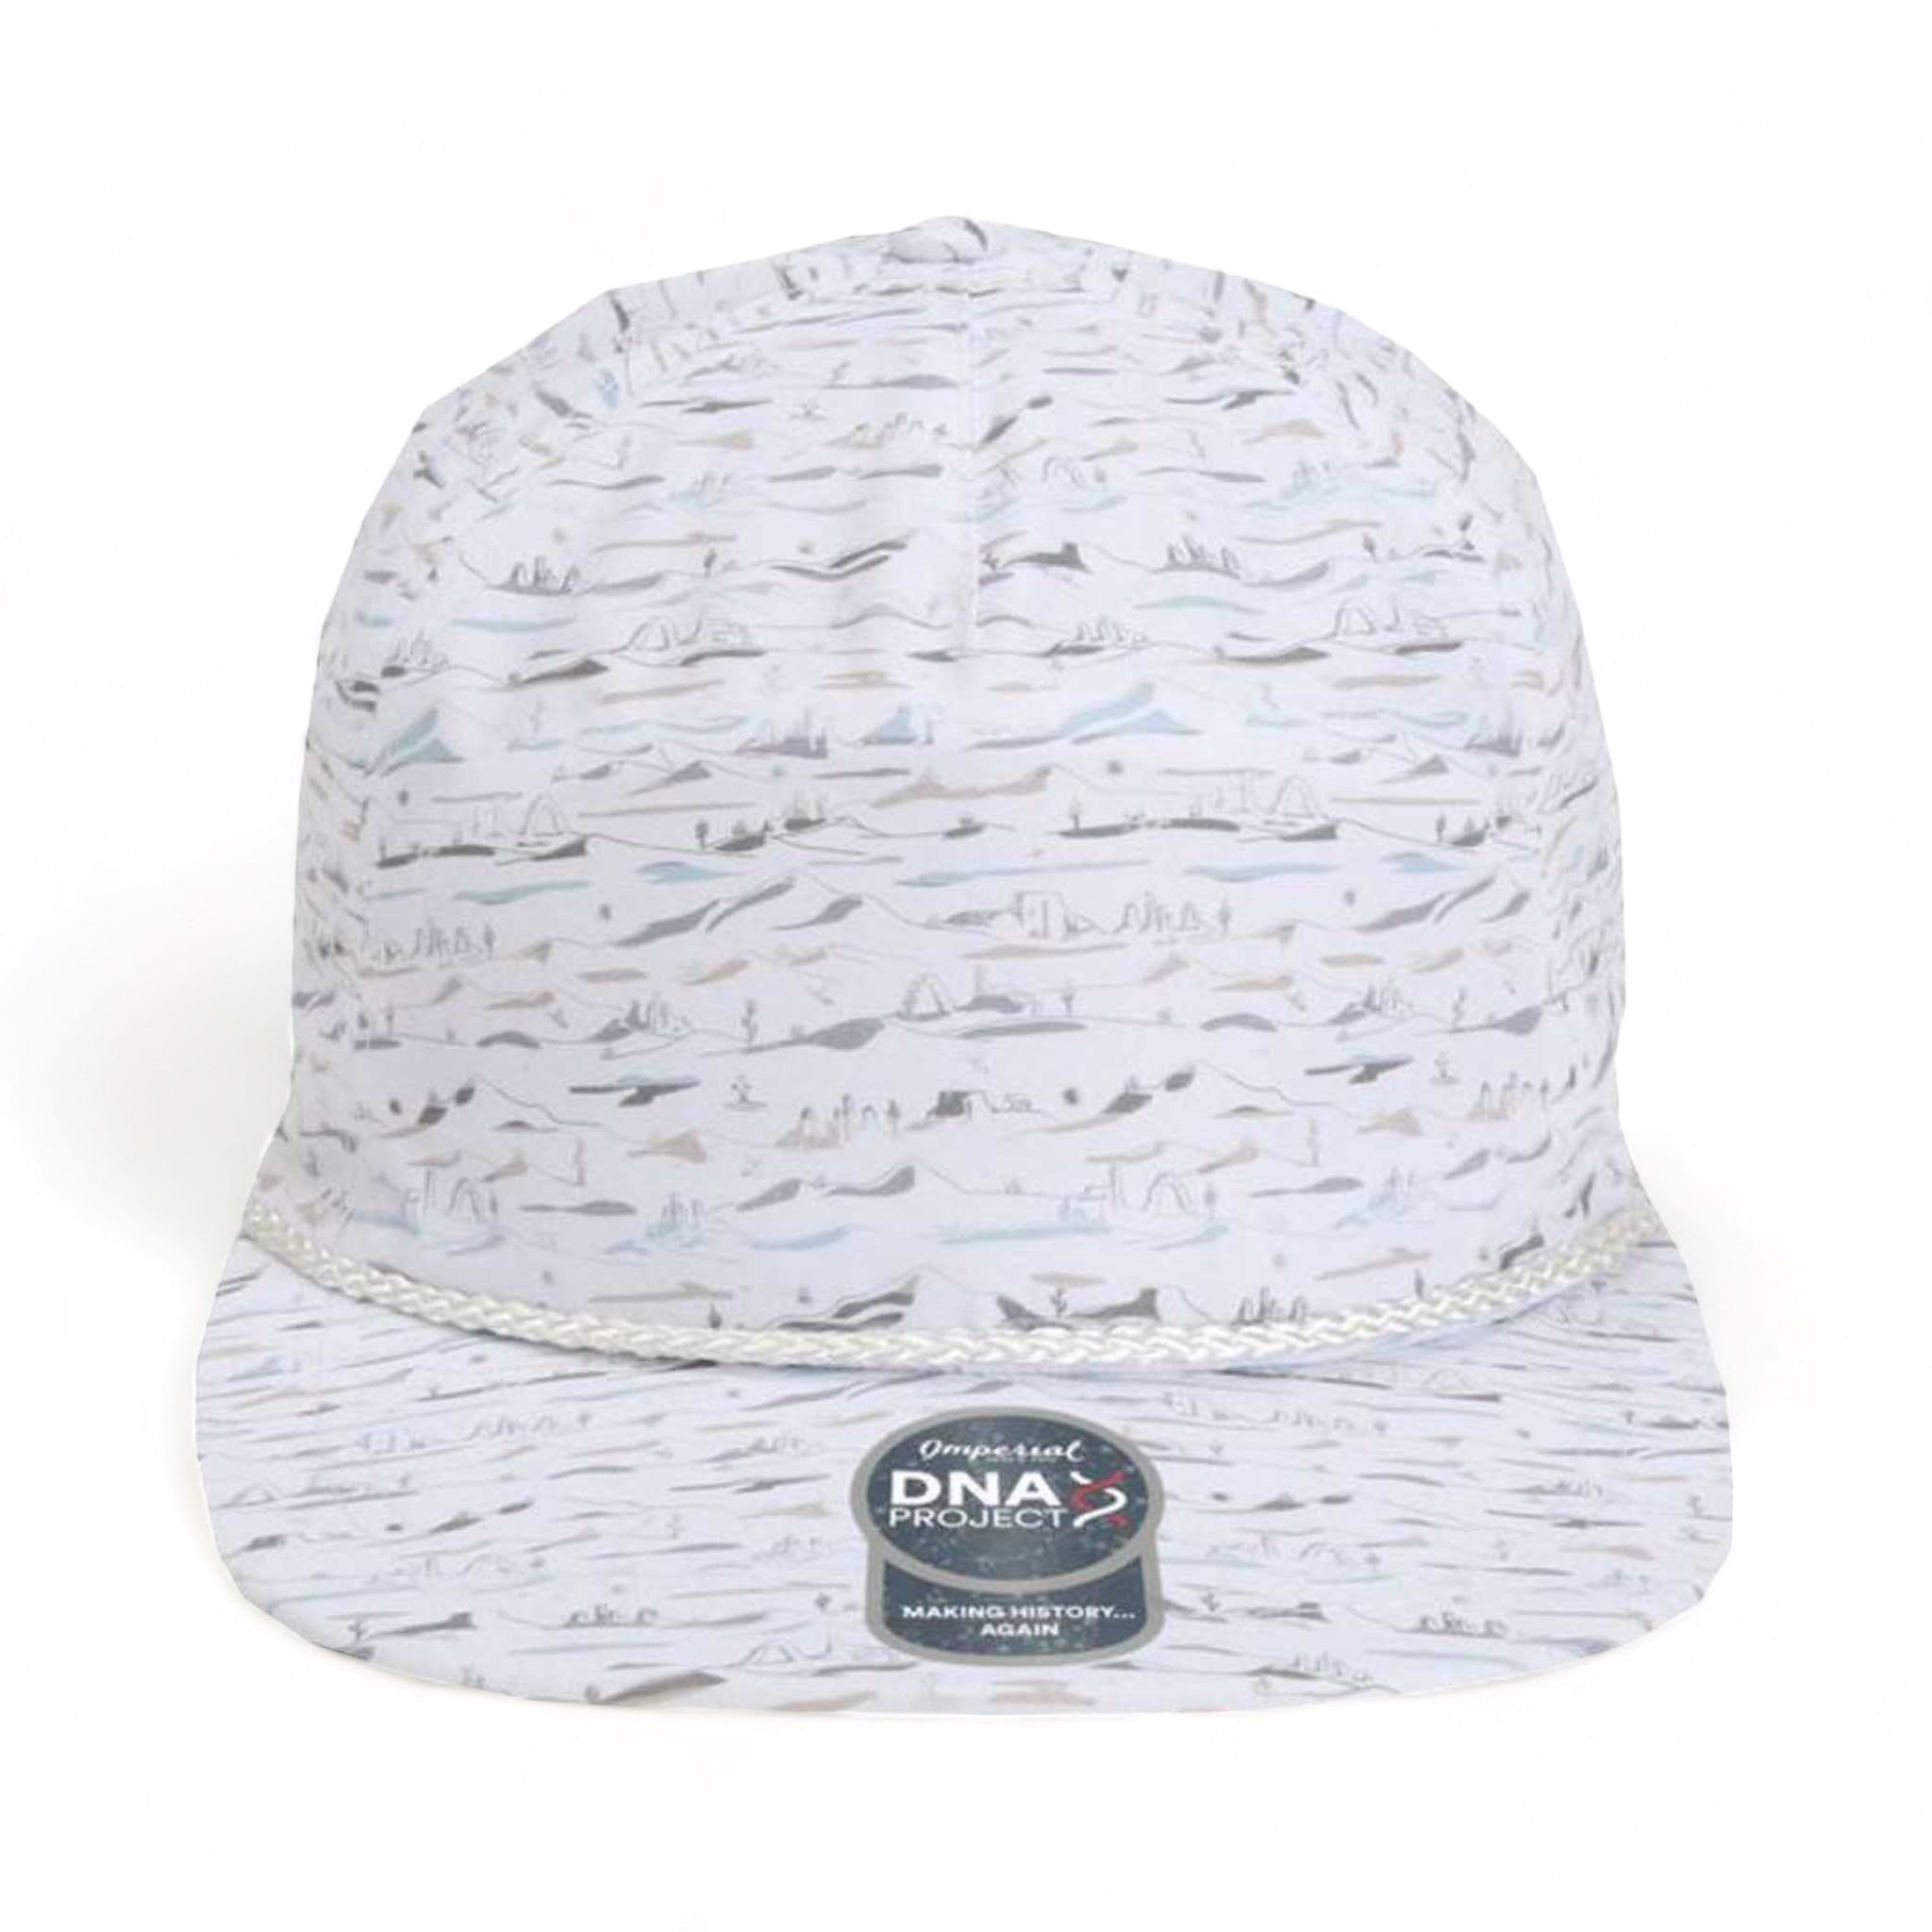 Front view of Imperial DNA010 custom hat in desert